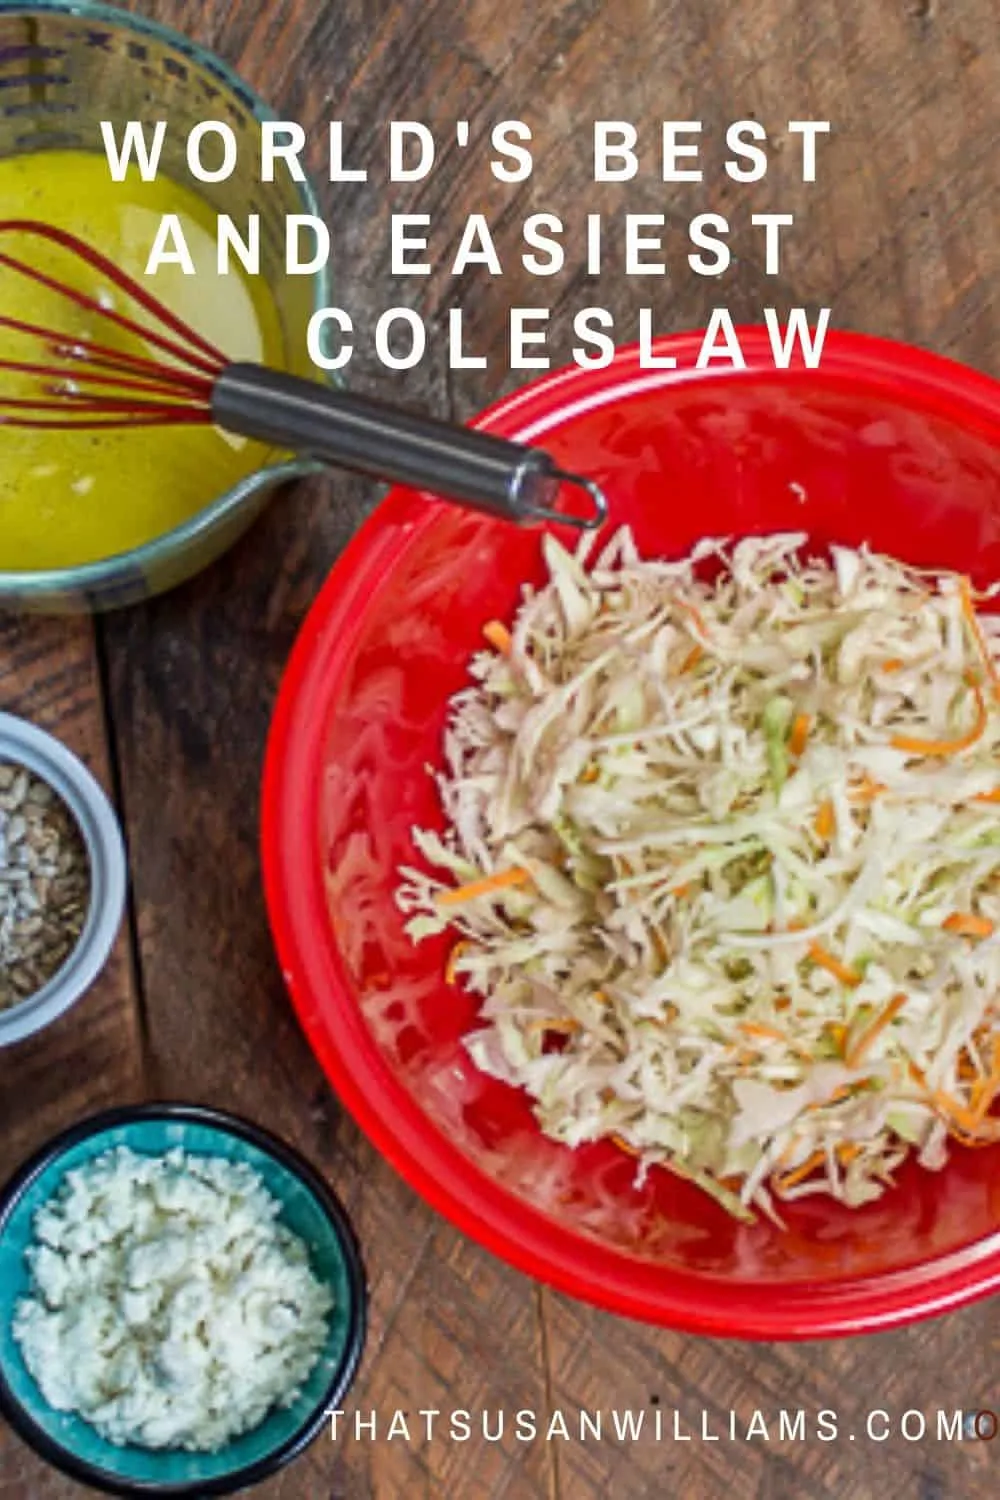 World's Best and Easiest Coleslaw with a Homemade Vinaigrette